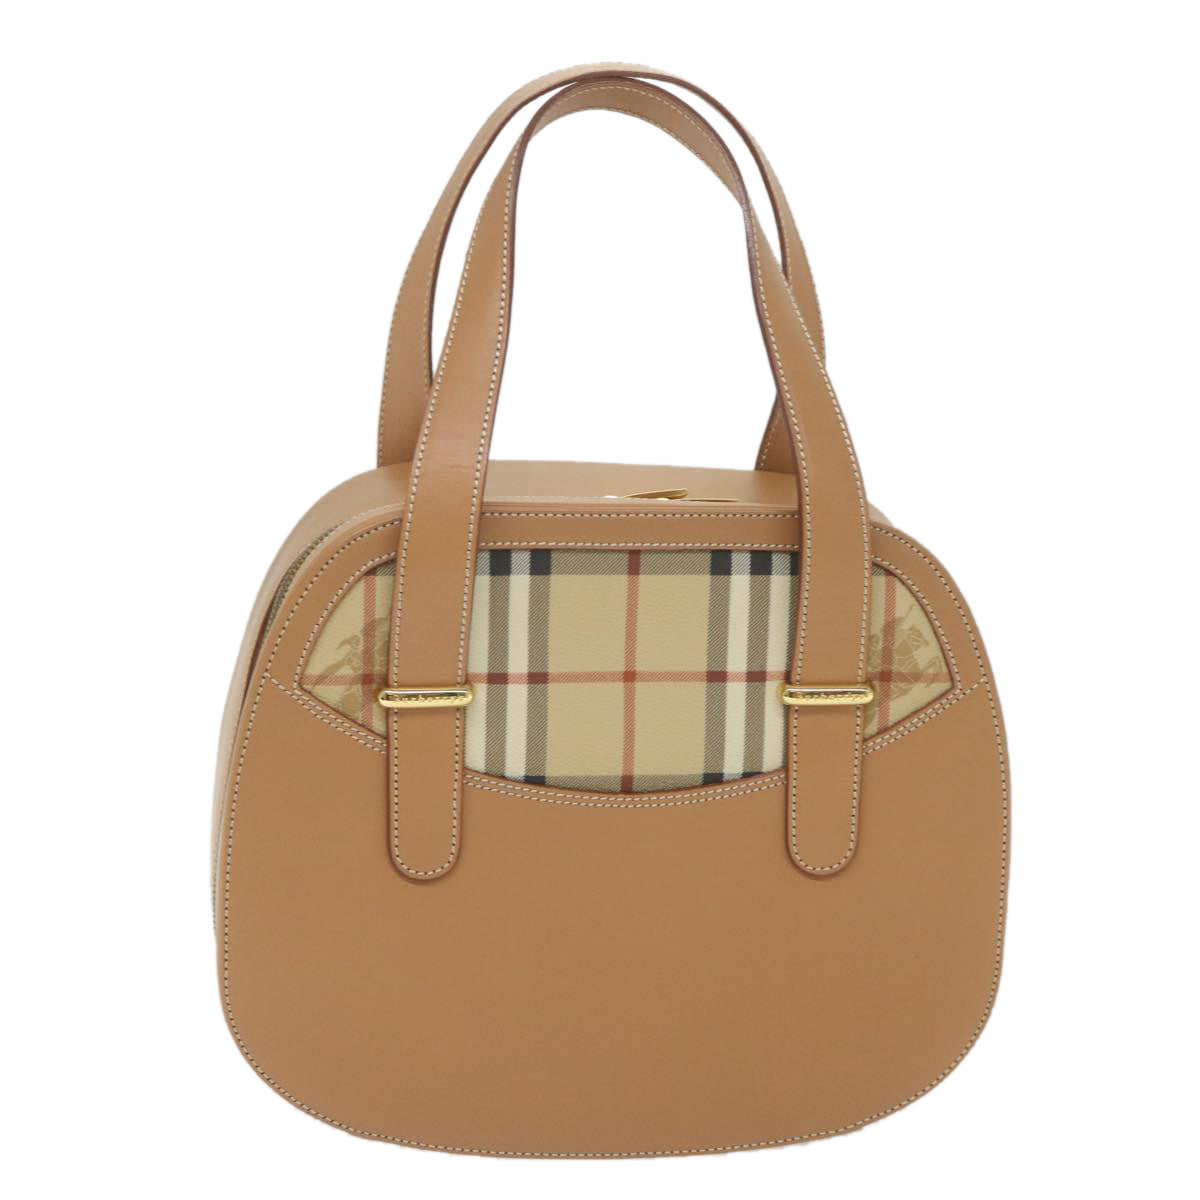 Burberrys Hand Bag Leather Beige Auth 59466 - 0